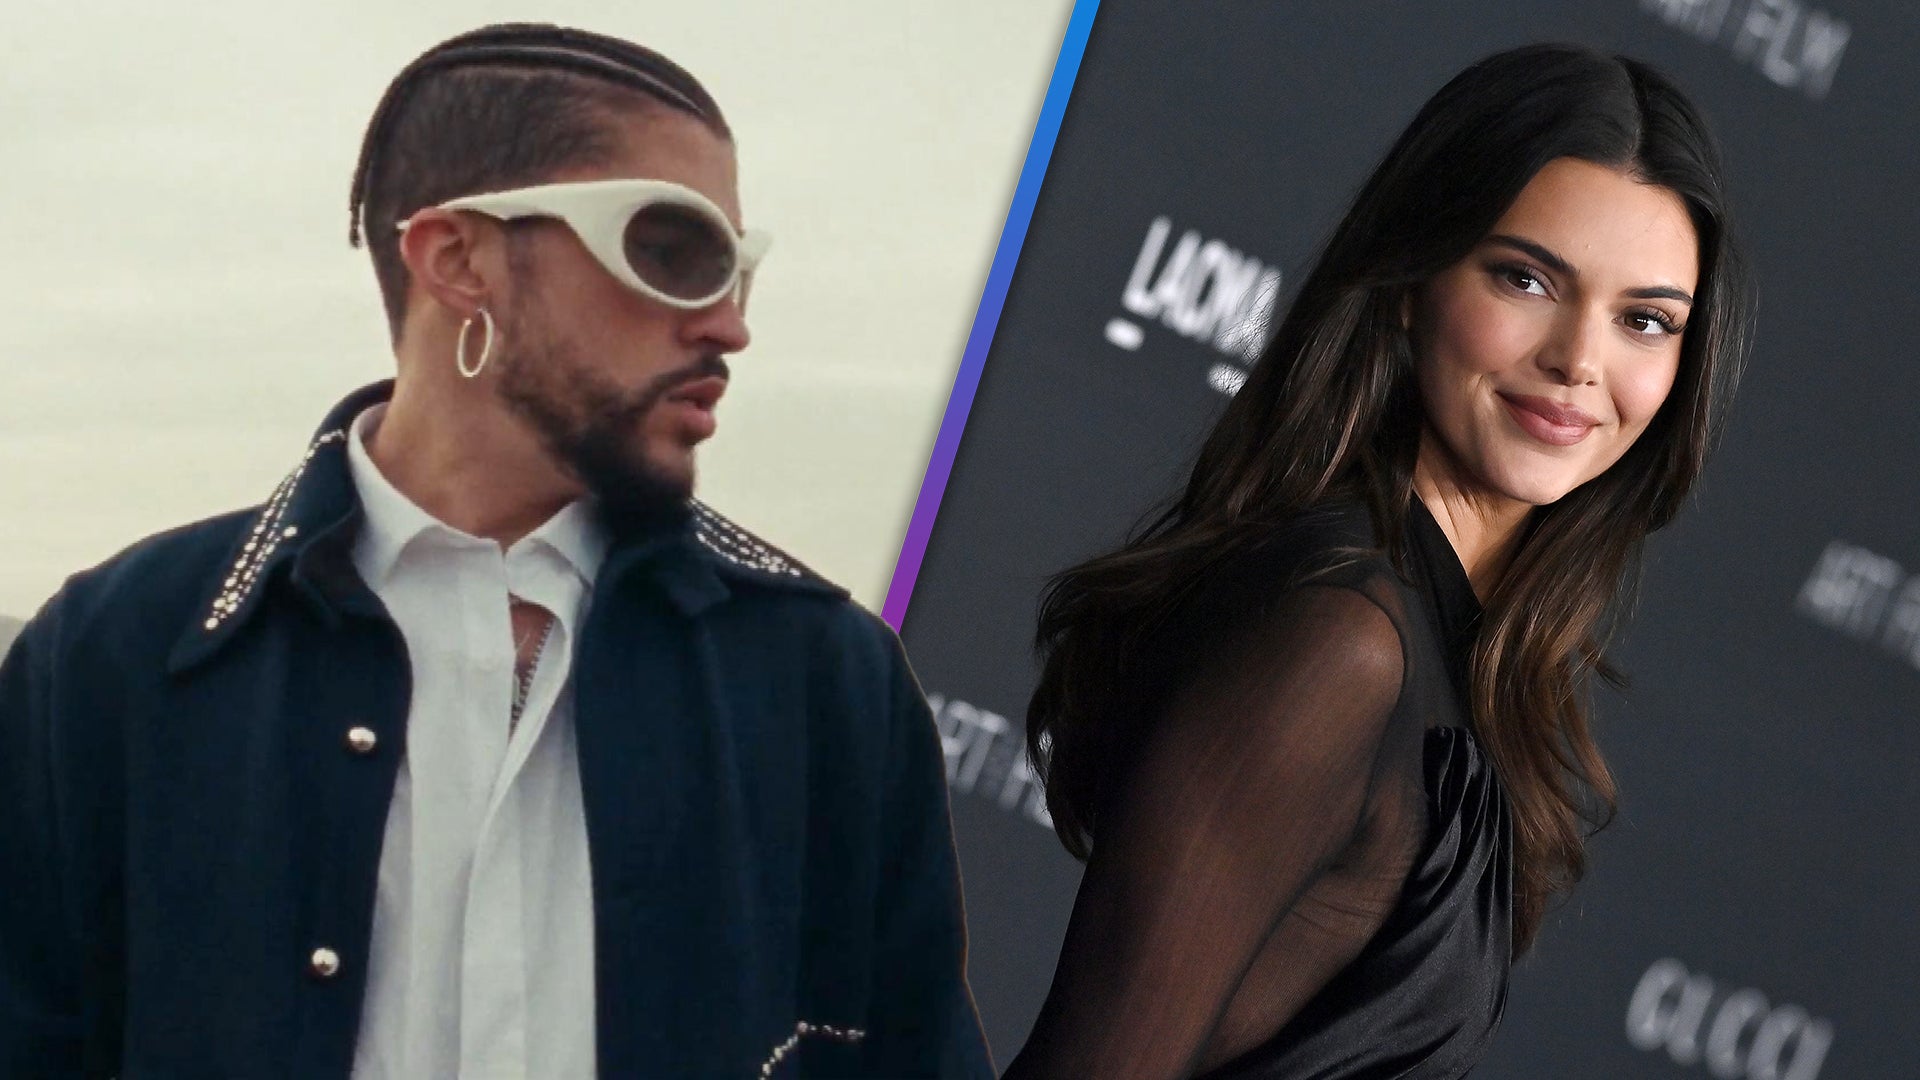 See Kendall Jenner and Bad Bunny Coordinate Their Looks In First Public Date